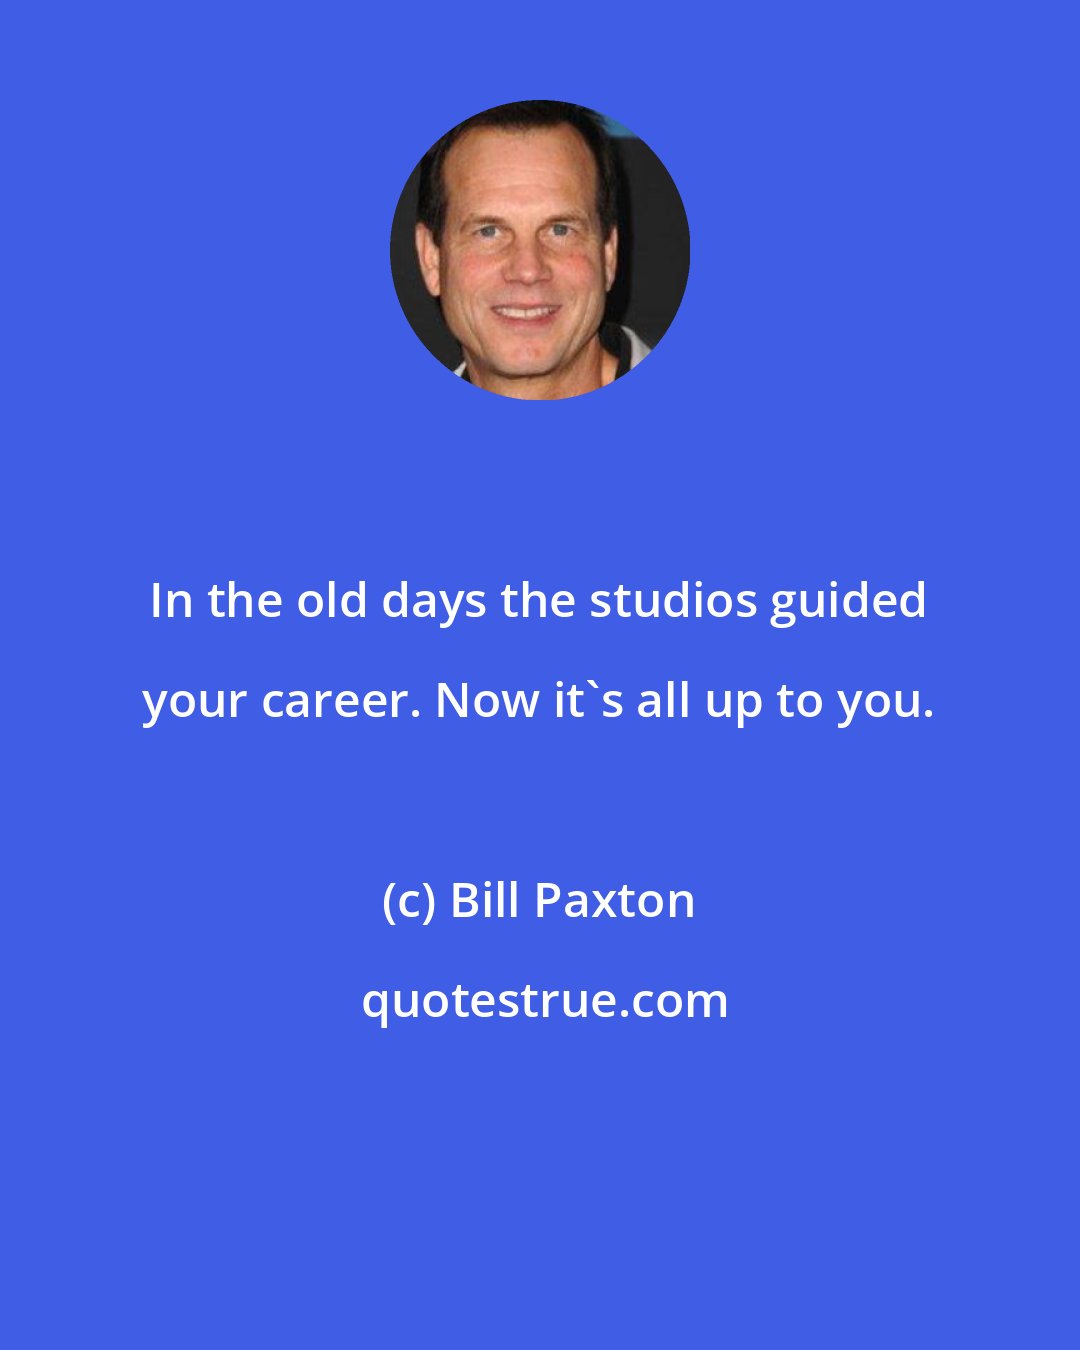 Bill Paxton: In the old days the studios guided your career. Now it's all up to you.